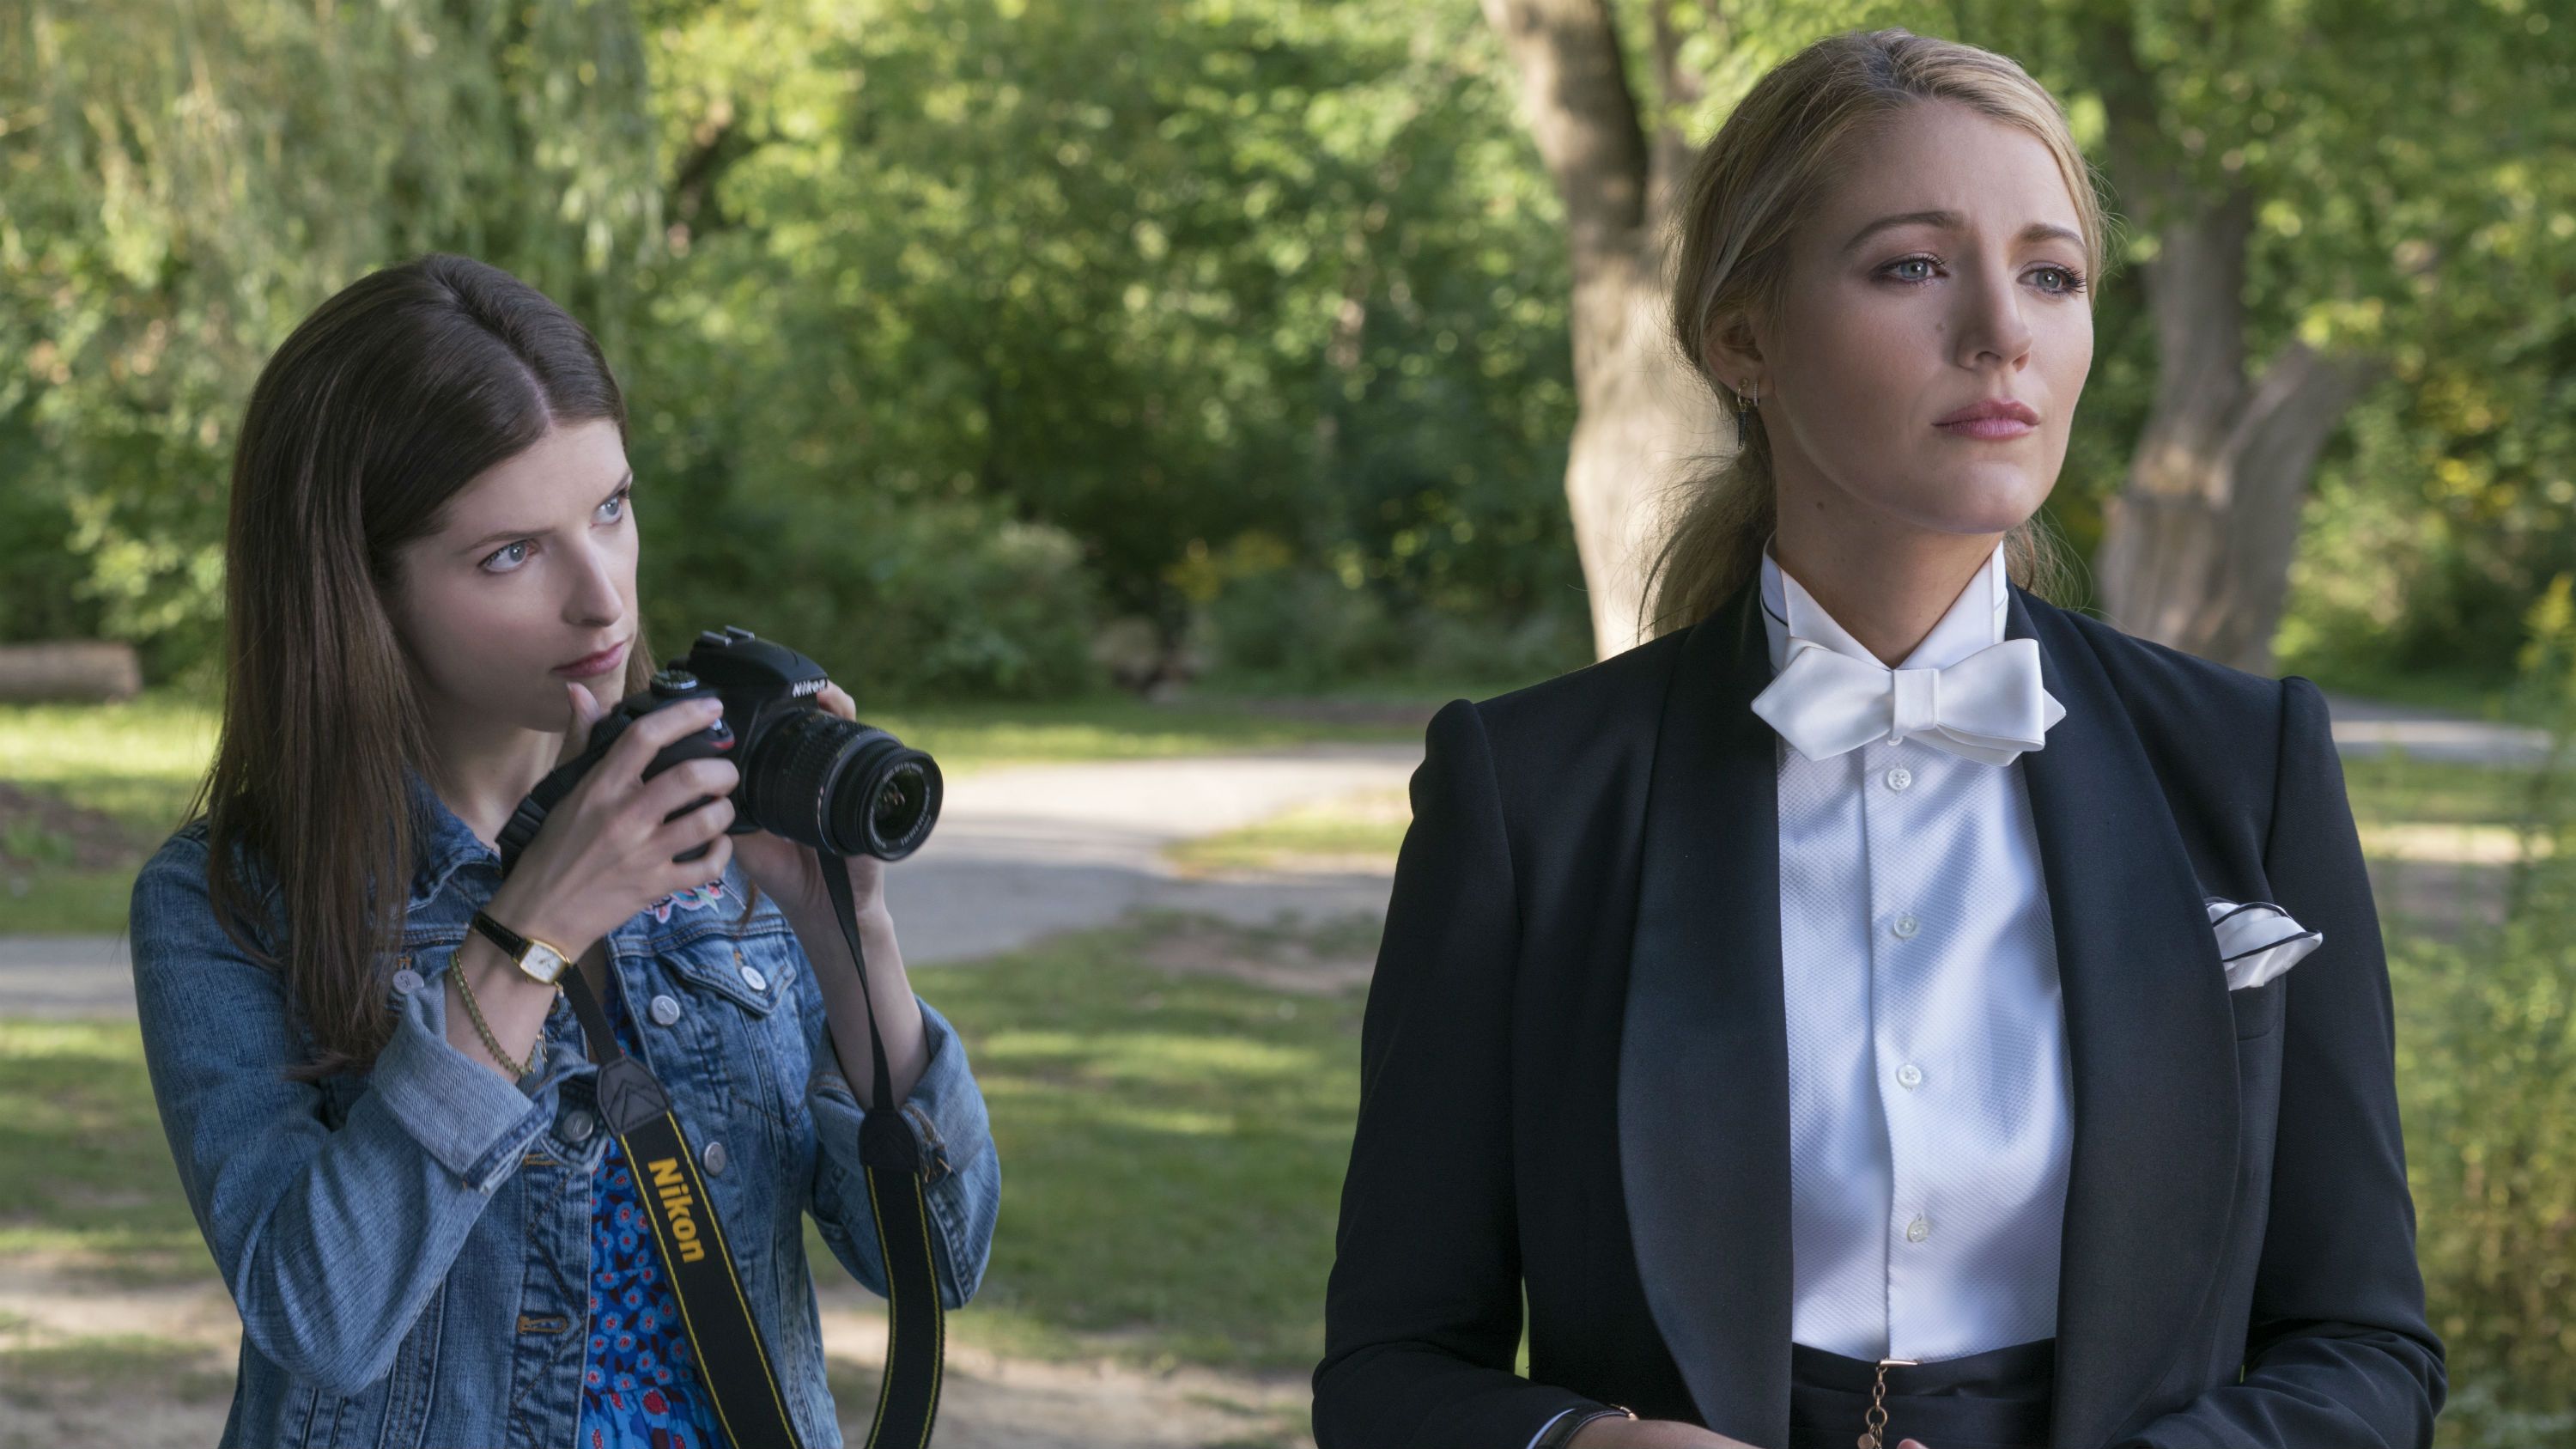 Prime Video movie of the day: Blake Lively is a hypnotic femme fatale in A Simple Favor